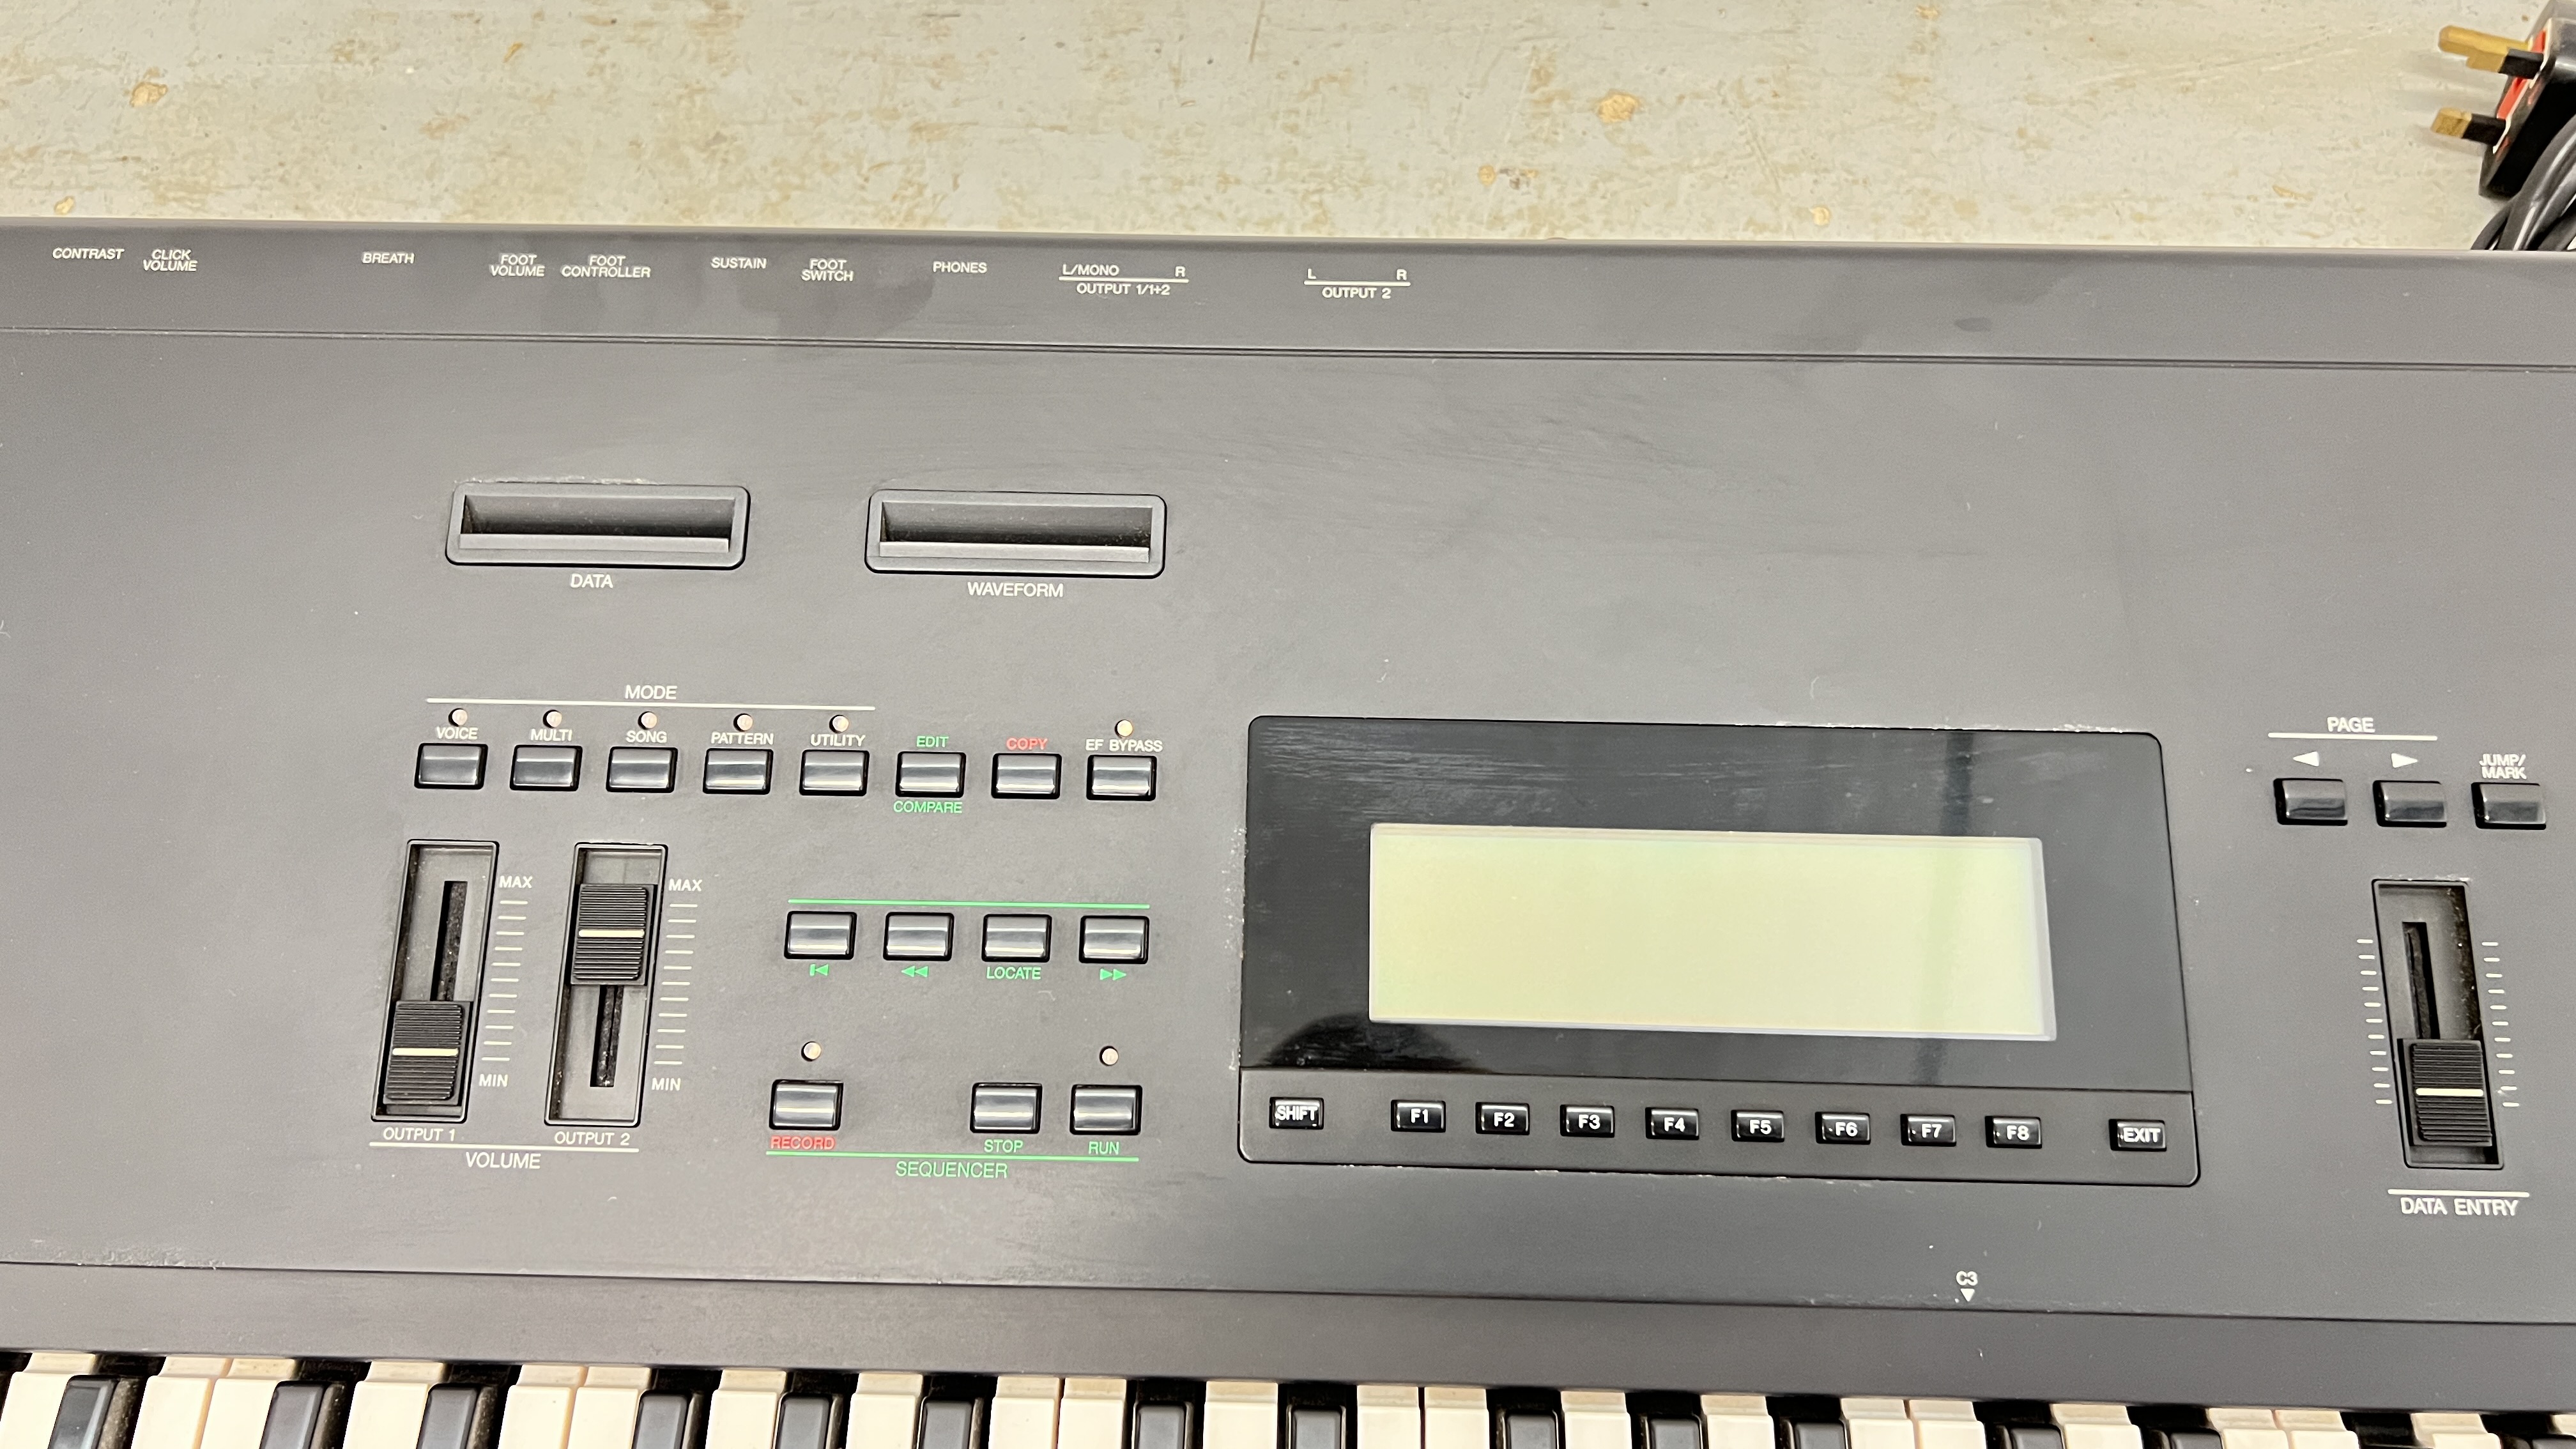 YAMAHA SY99 MUSIC SYNTHESIZER - SOLD AS SEEN - AS CLEARED. - Image 3 of 6